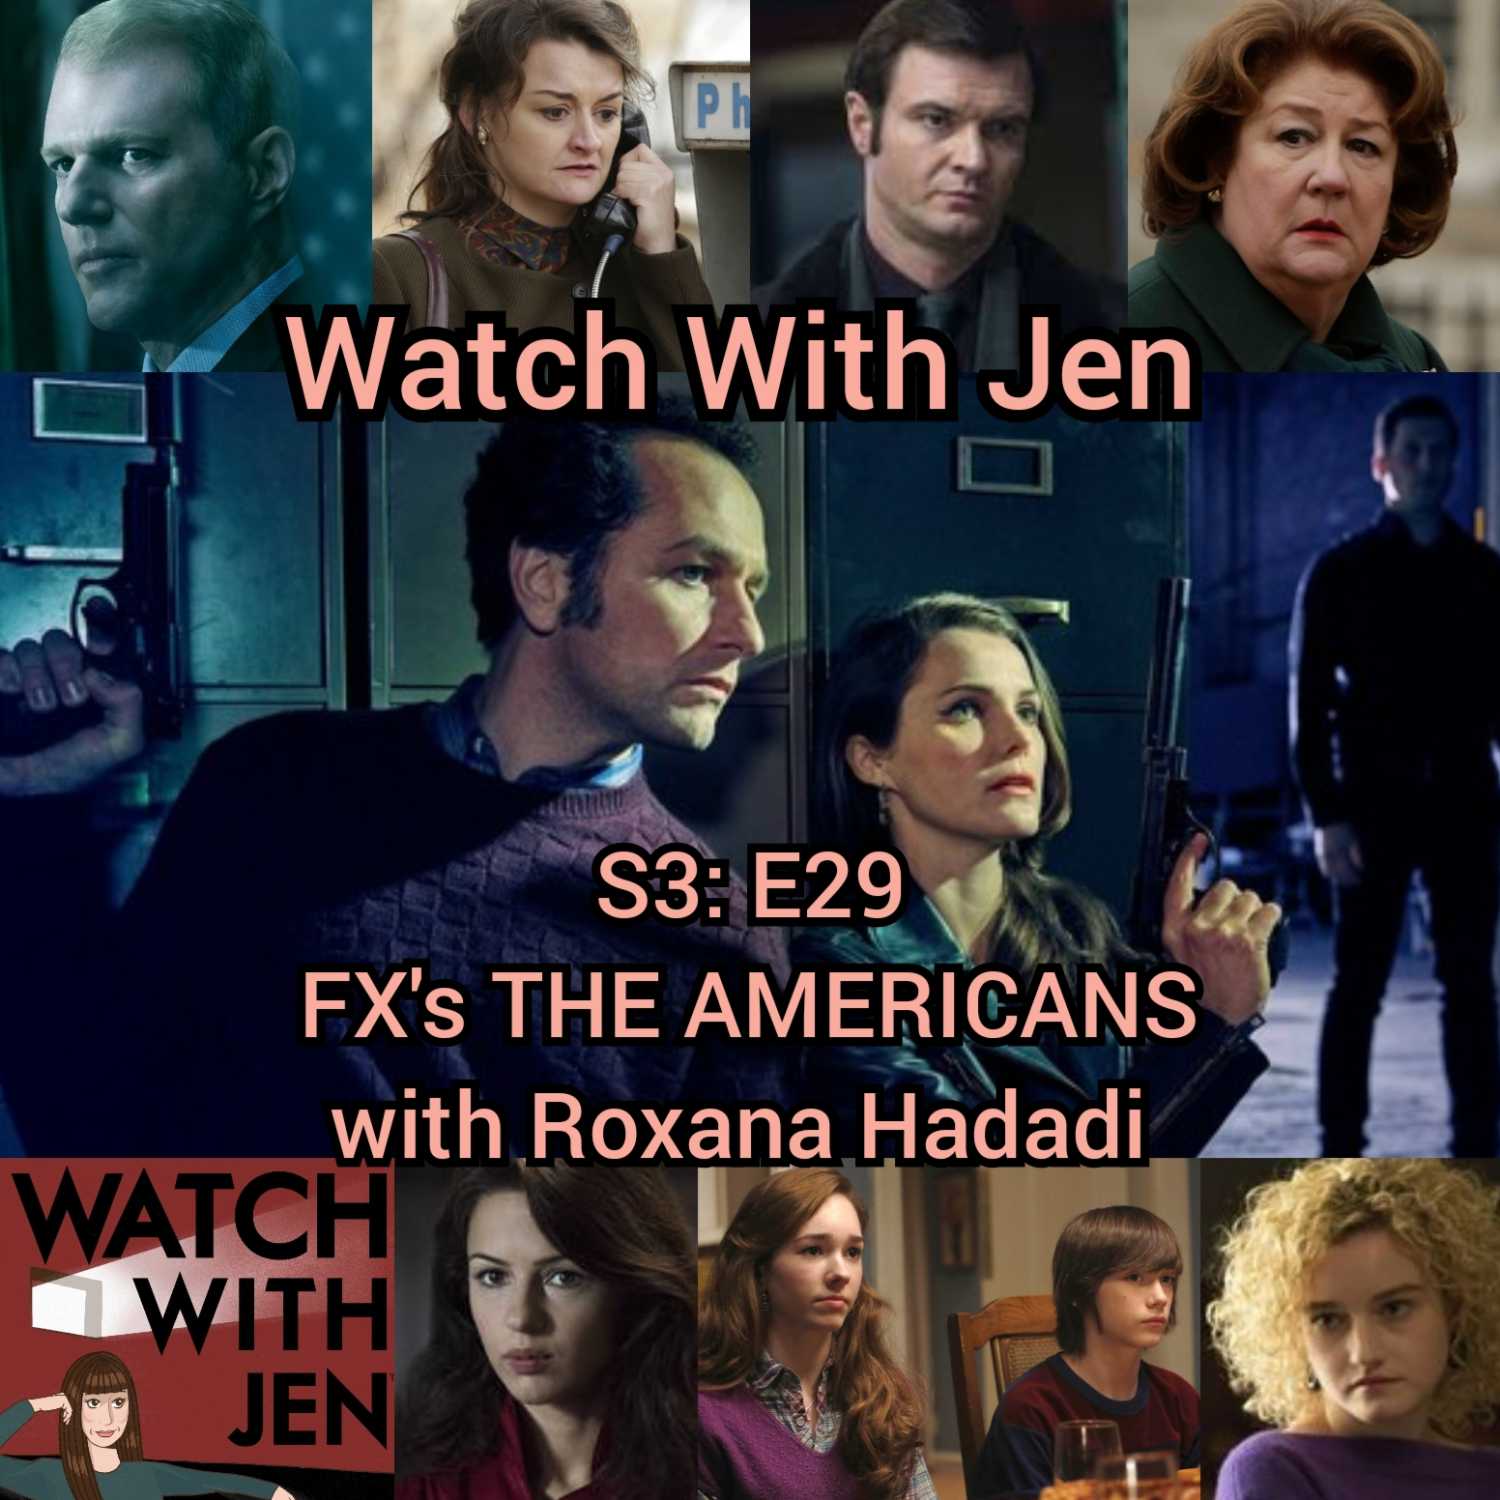 Watch With Jen - S3: E29 - FX’s THE AMERICANS with Roxana Hadadi